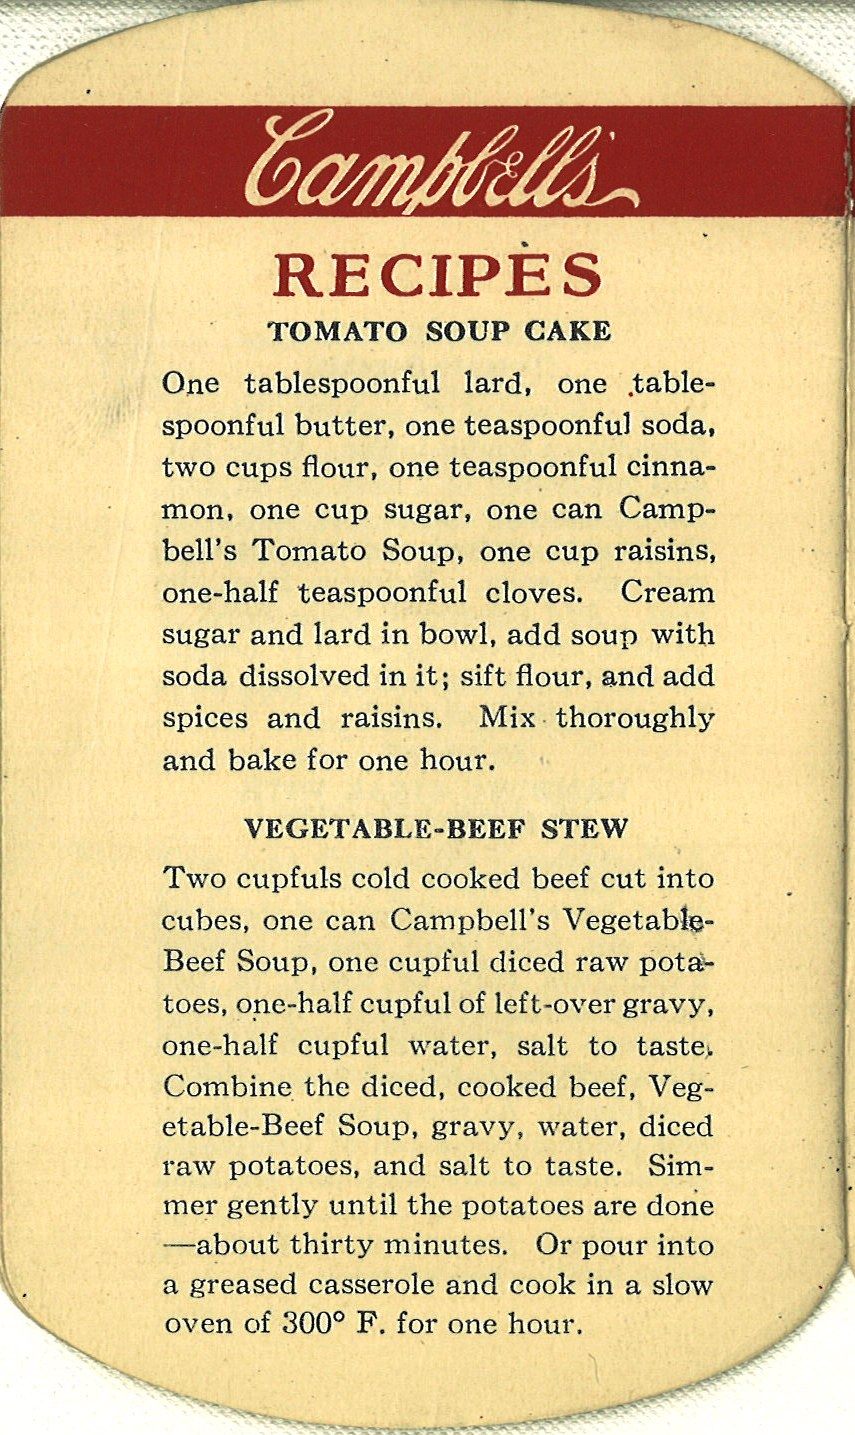 A recipe in the Campbell's archives dating back to 1922.